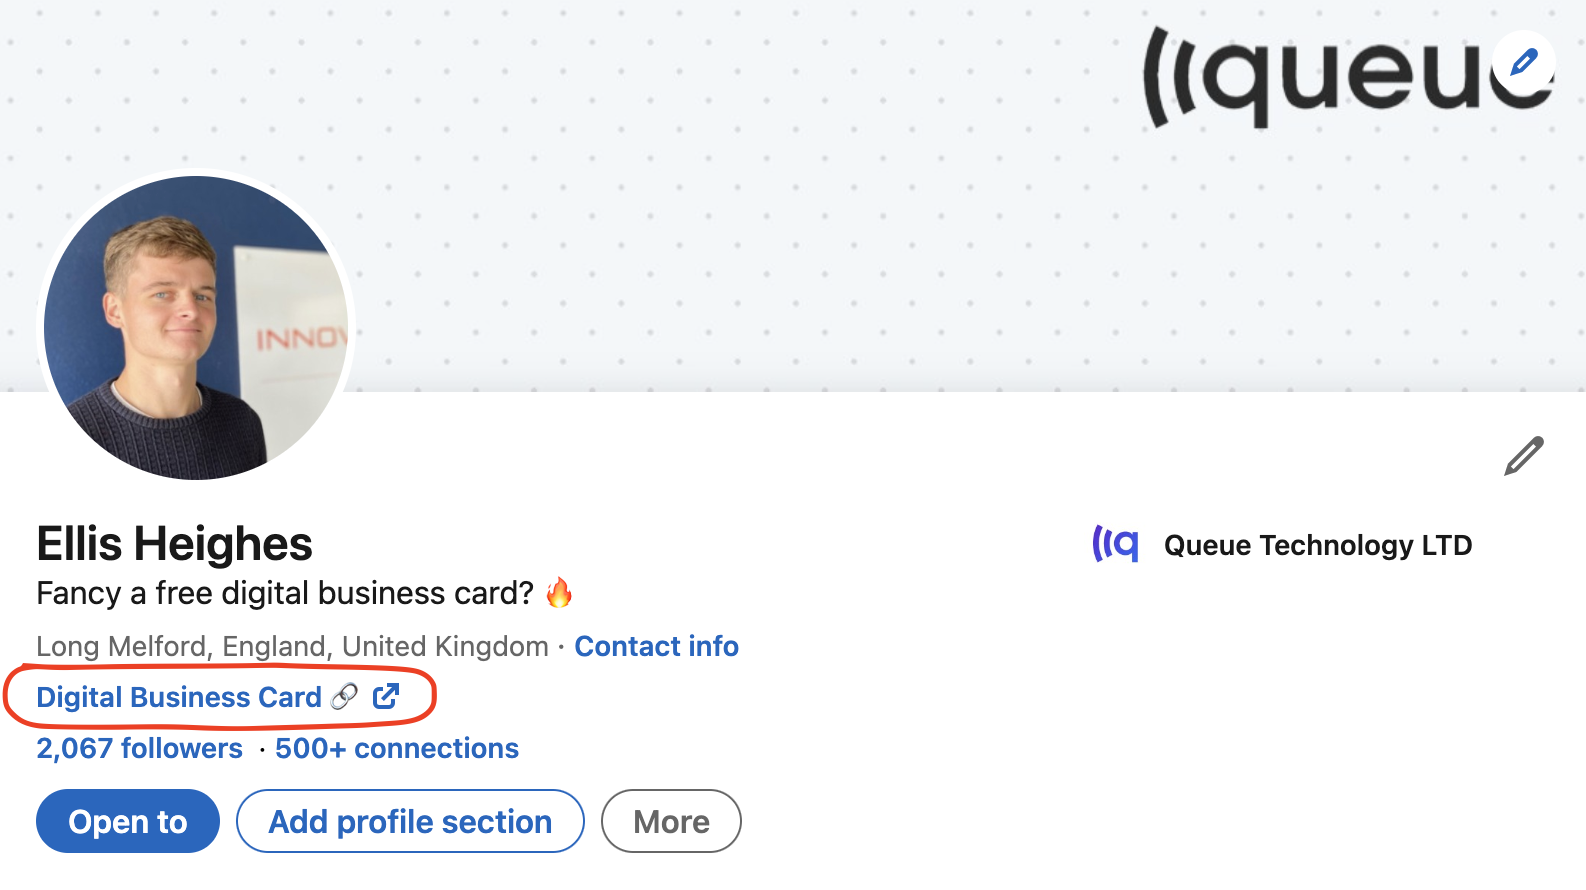 How to Add a Queue Business Card to Your LinkedIn Bio in 6 Simple Steps